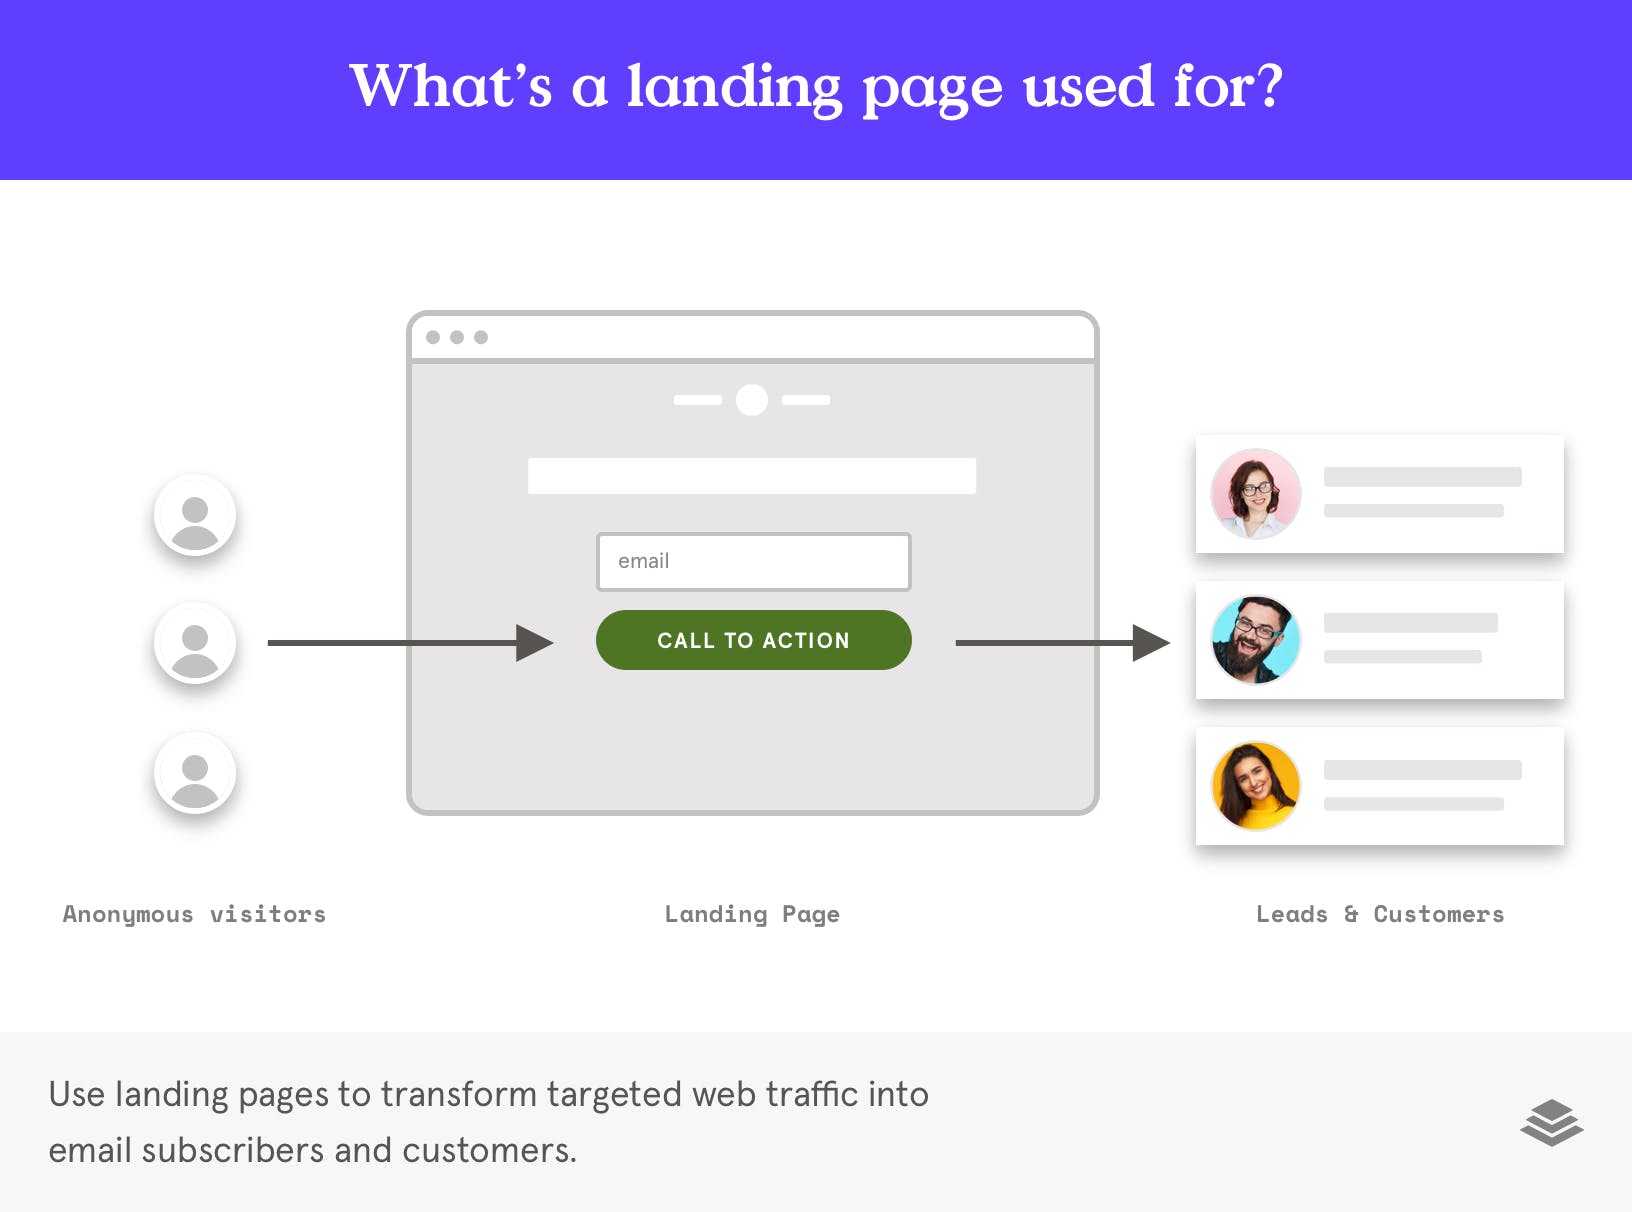 landing pages transform web traffic into leads